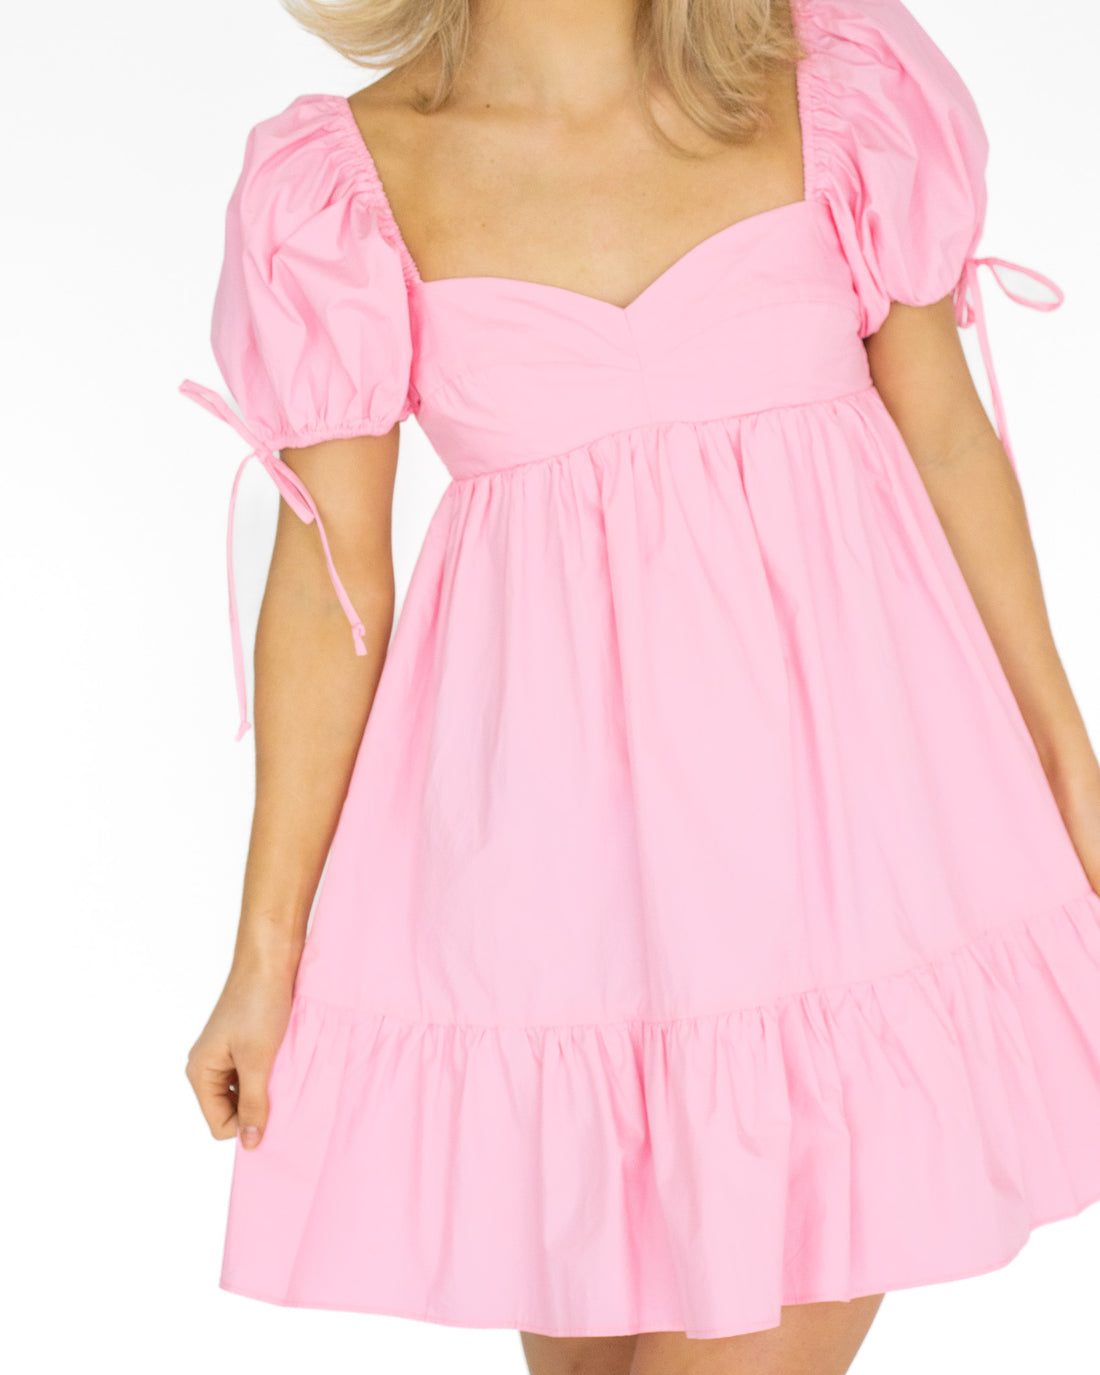 All Dolled Up Pink Babydoll Dress